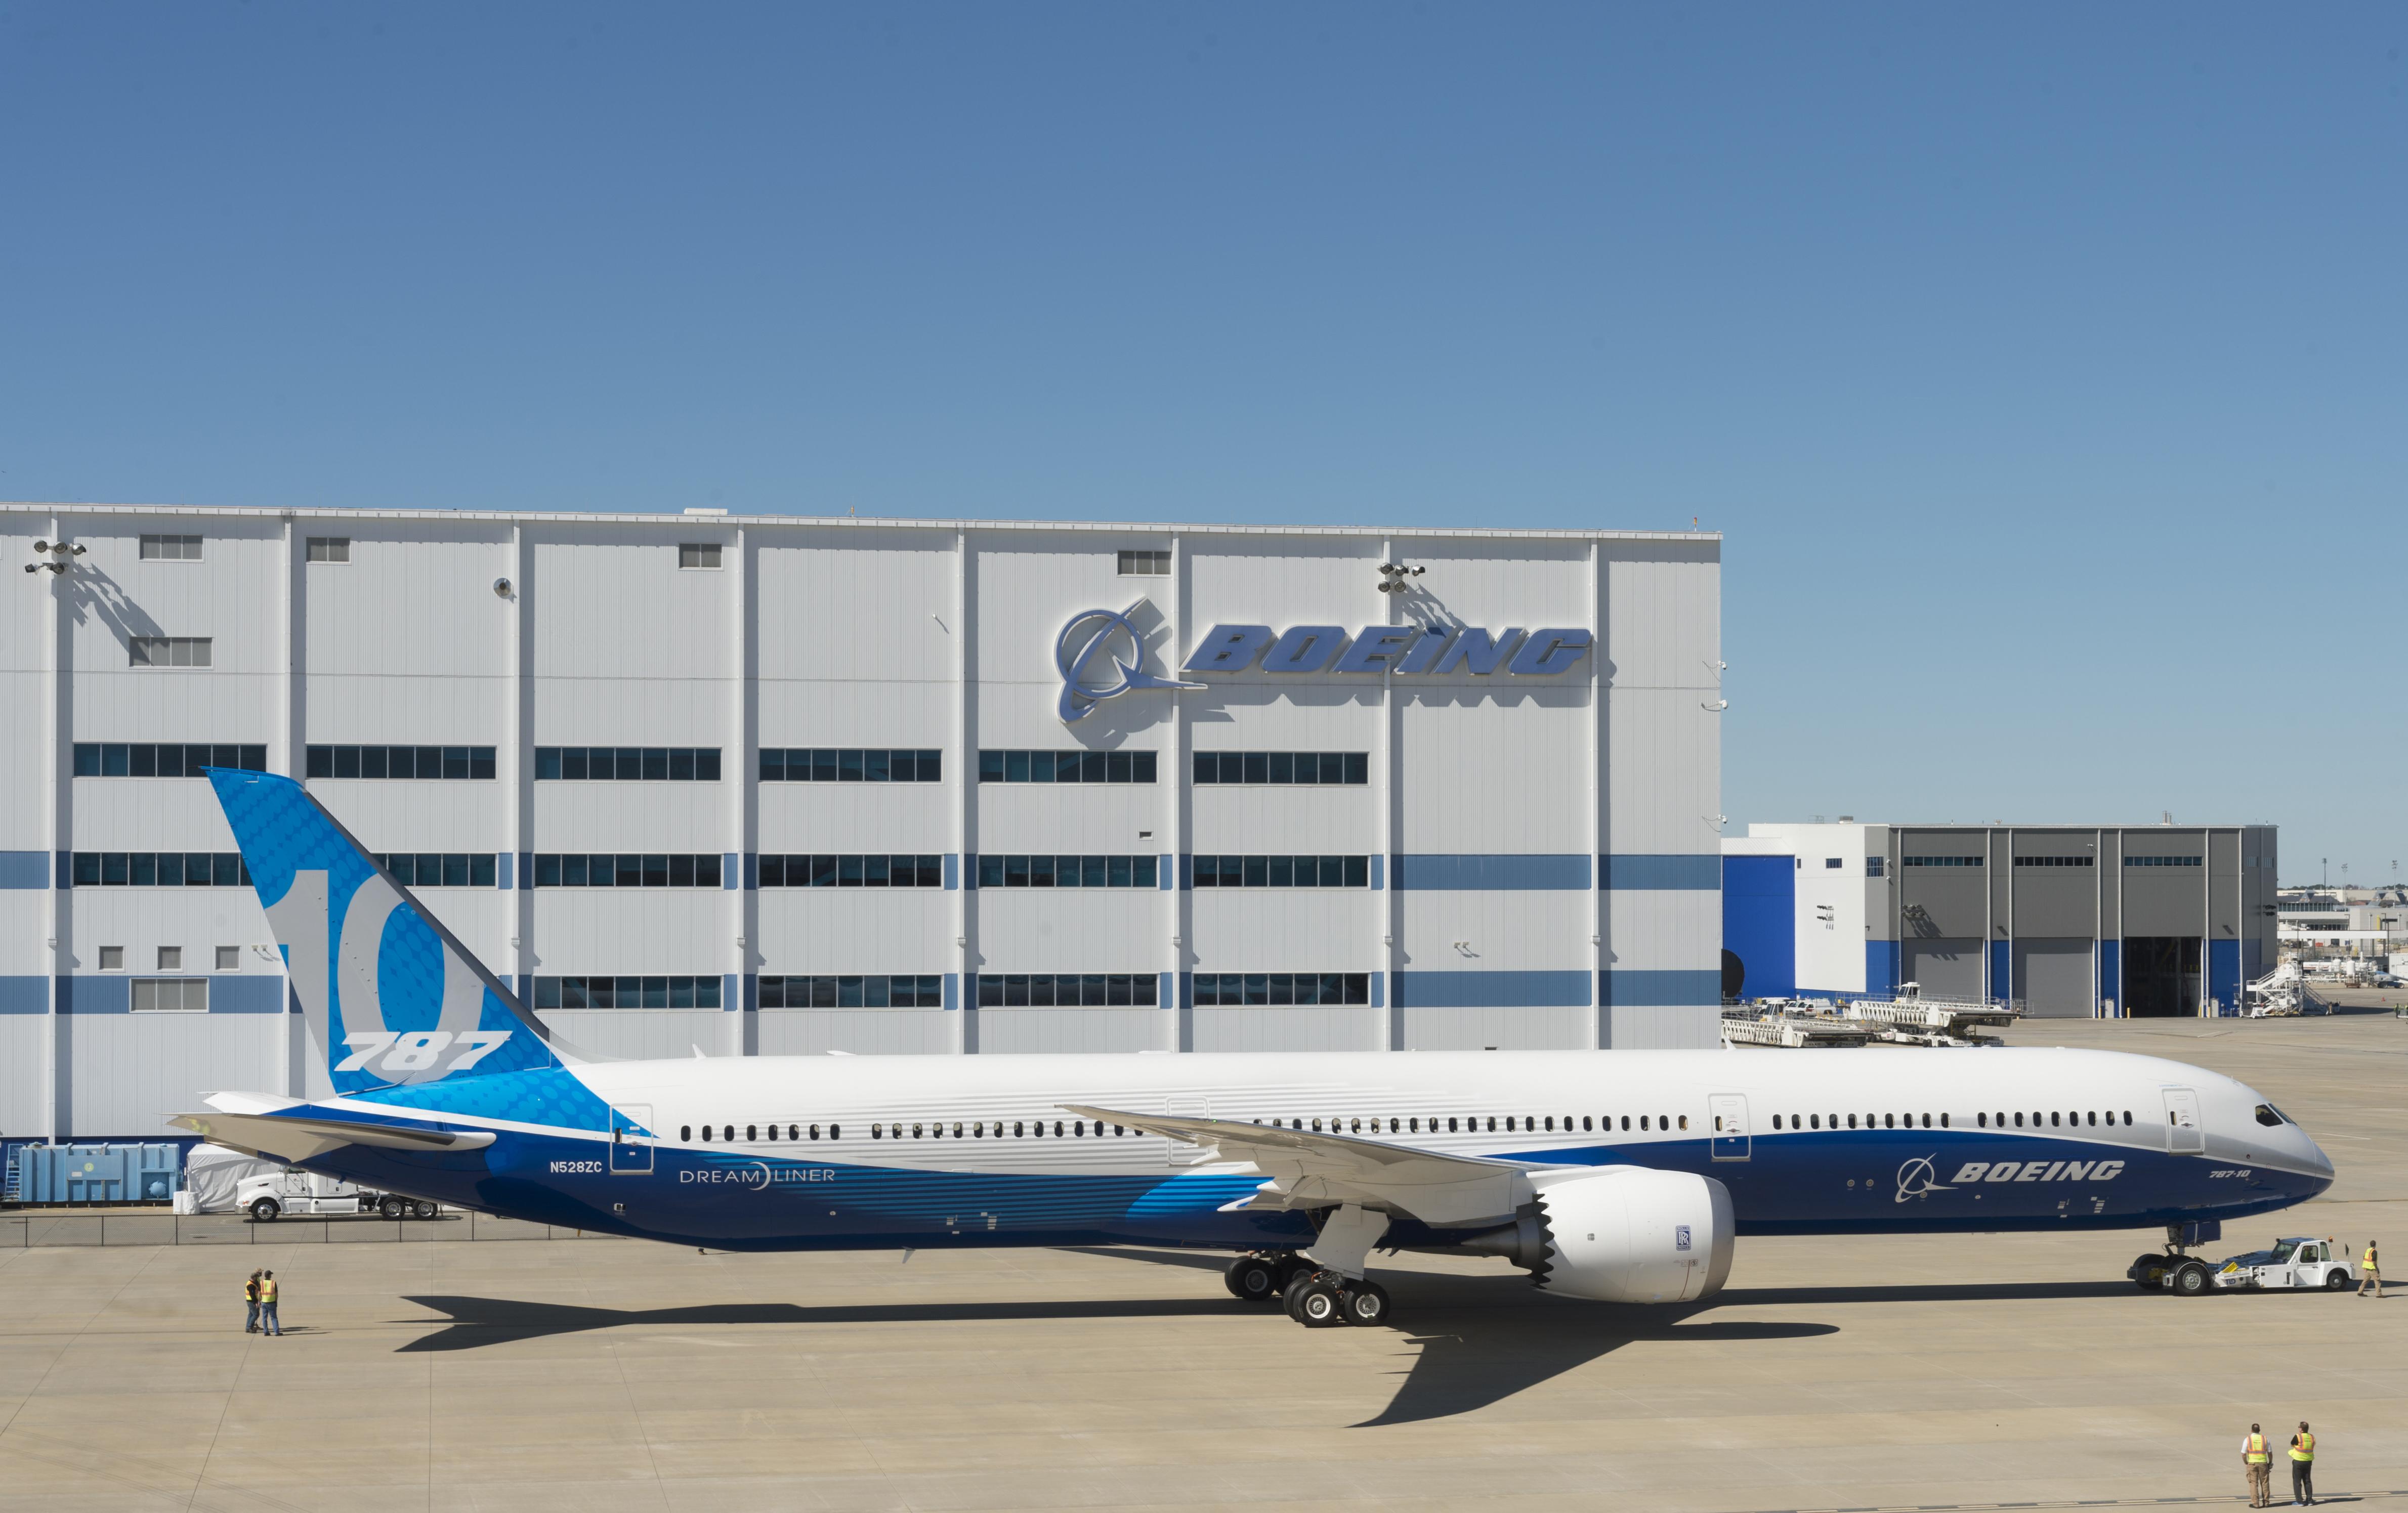 Boeing 787-10 Charleston rollout